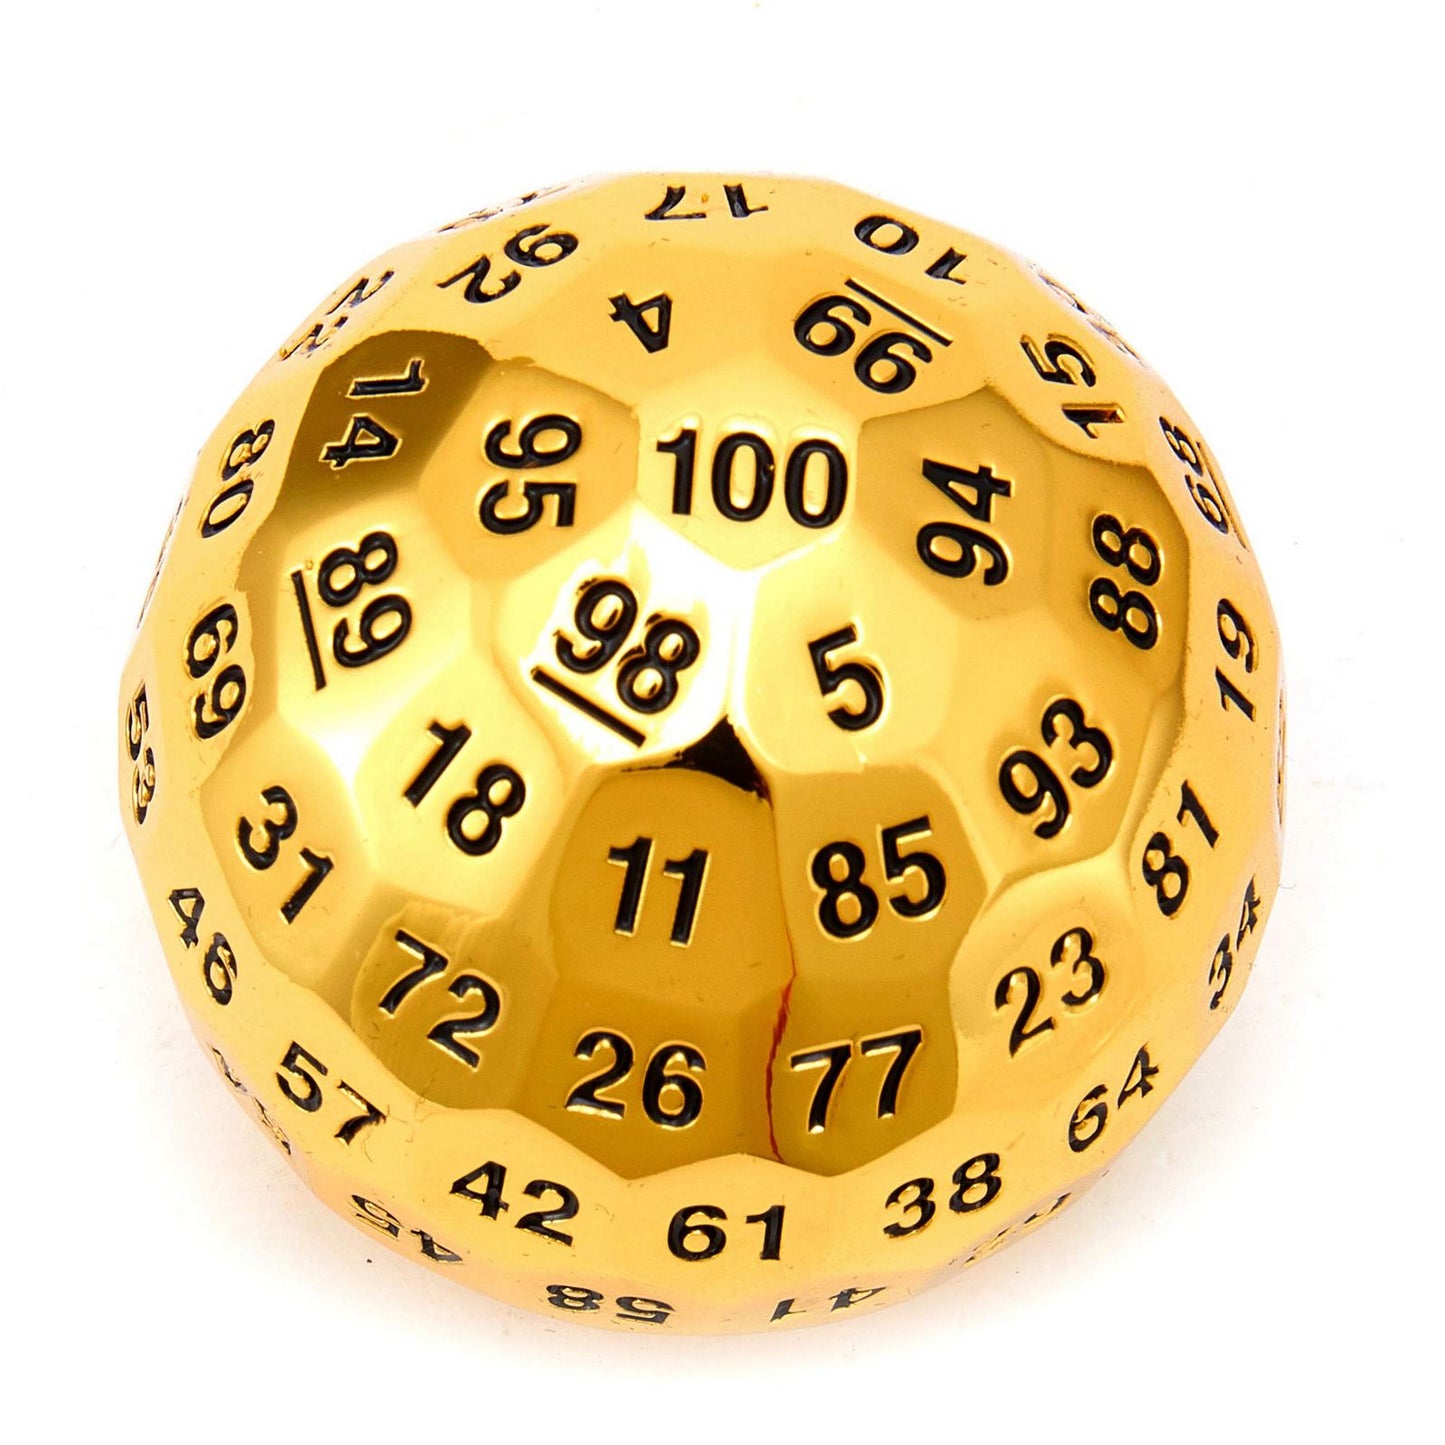 HYMGHO Titans Fist metal Polyhedral Dice 100 Sided D100 die Gold Color - HYMGHO Dice 